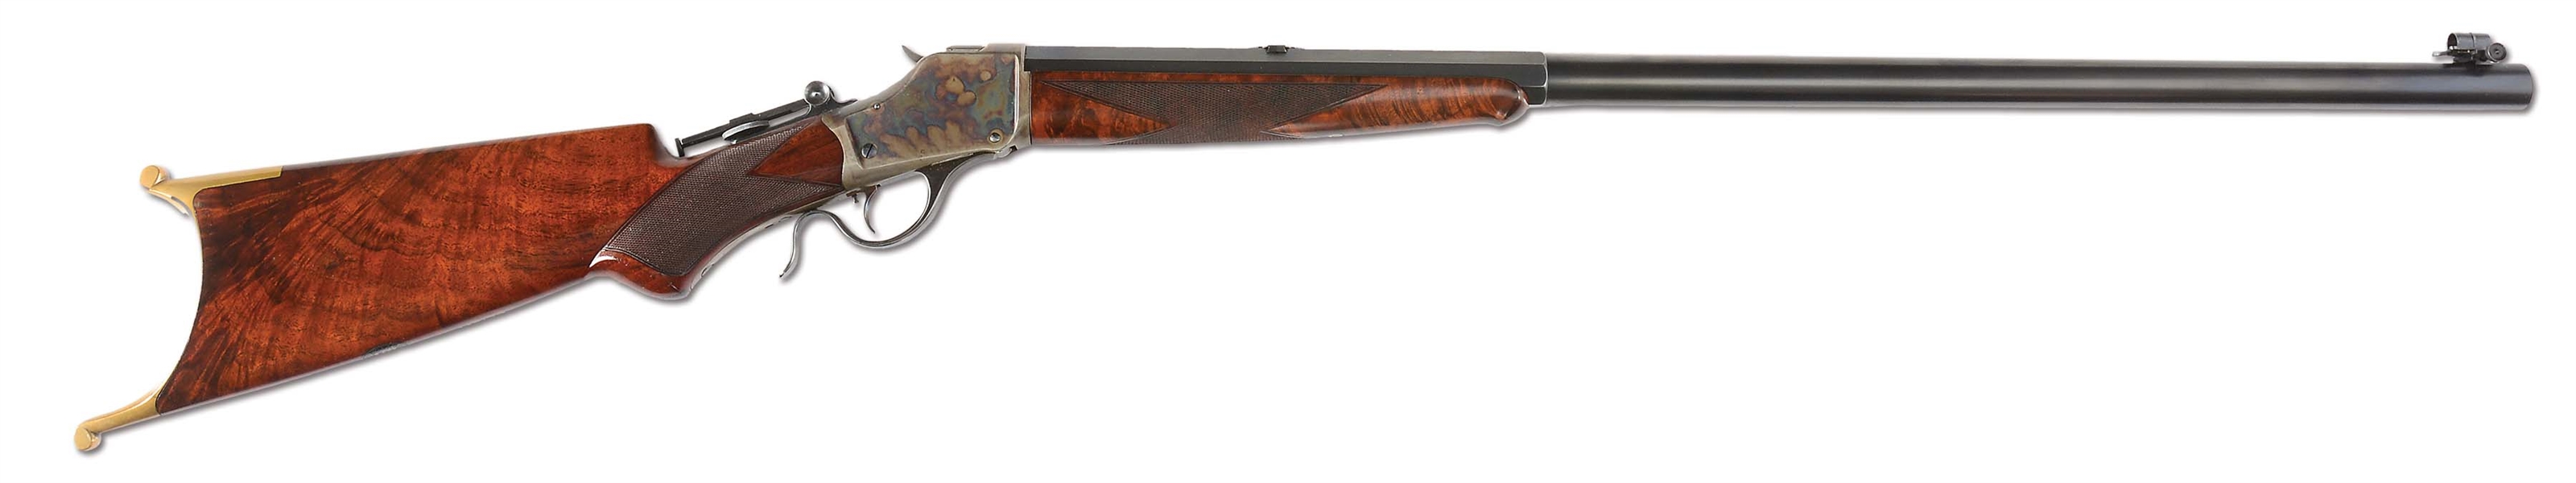 (A) WINCHESTER POPE HI-WALL SPECIAL SPORTING SCHUTZEN RIFLE WITH FALSE MUZZLE.